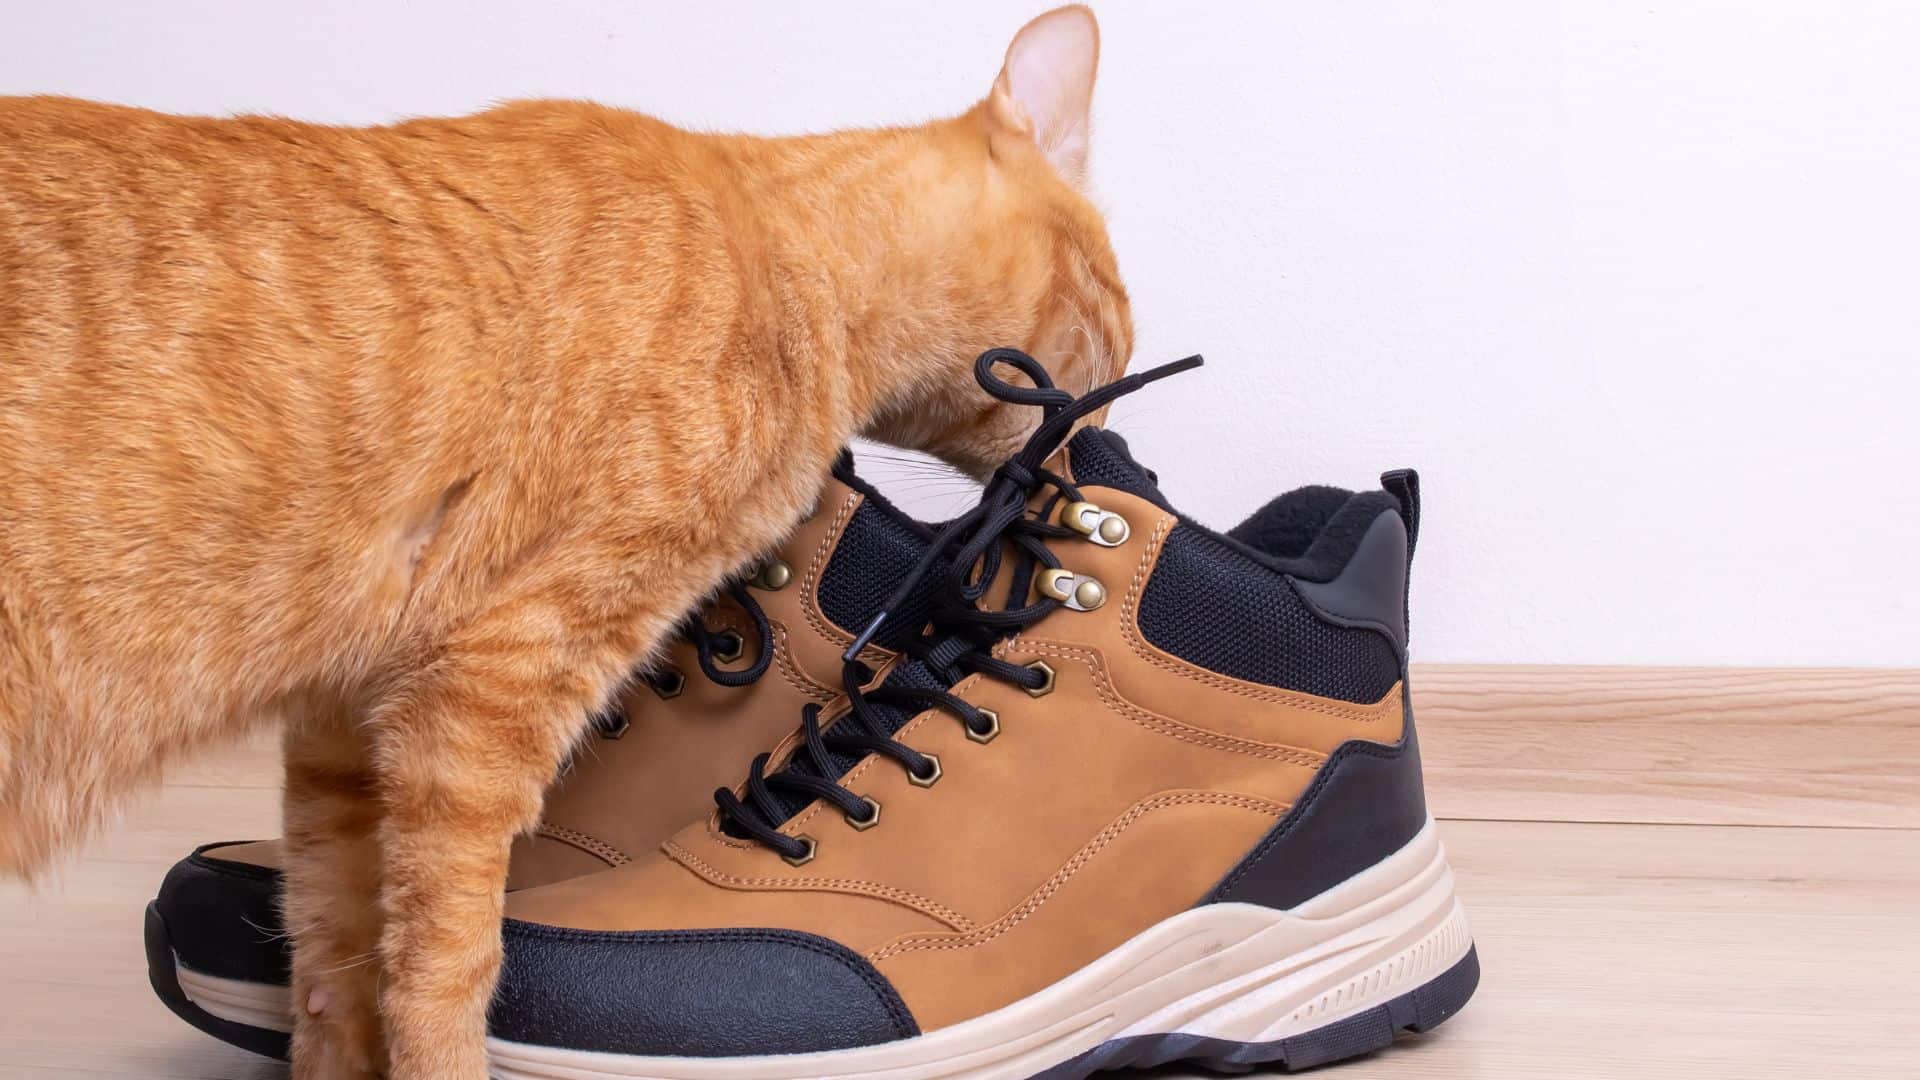 the cat sniffs the shoes